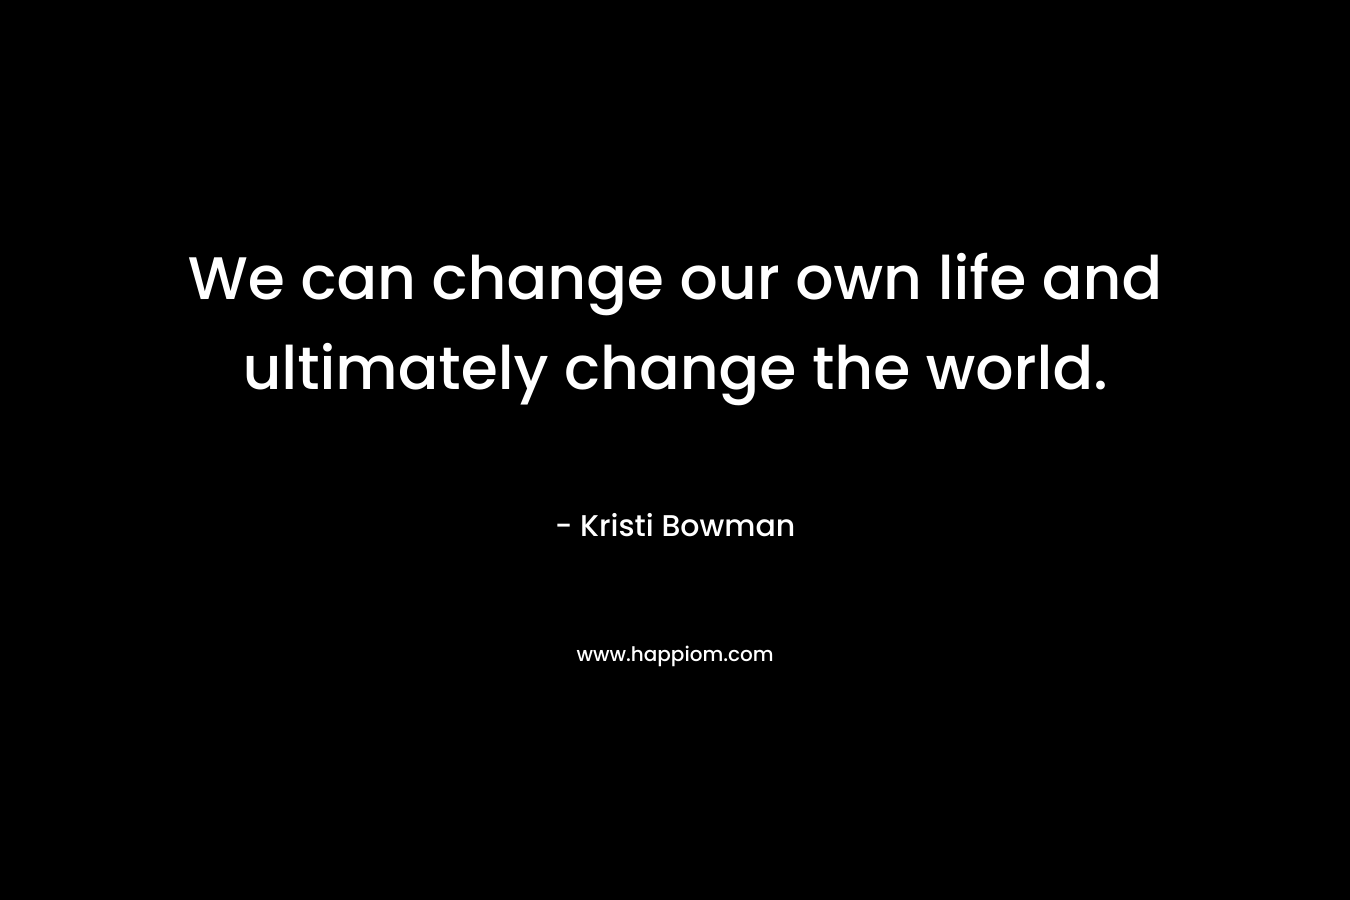 We can change our own life and ultimately change the world. – Kristi Bowman